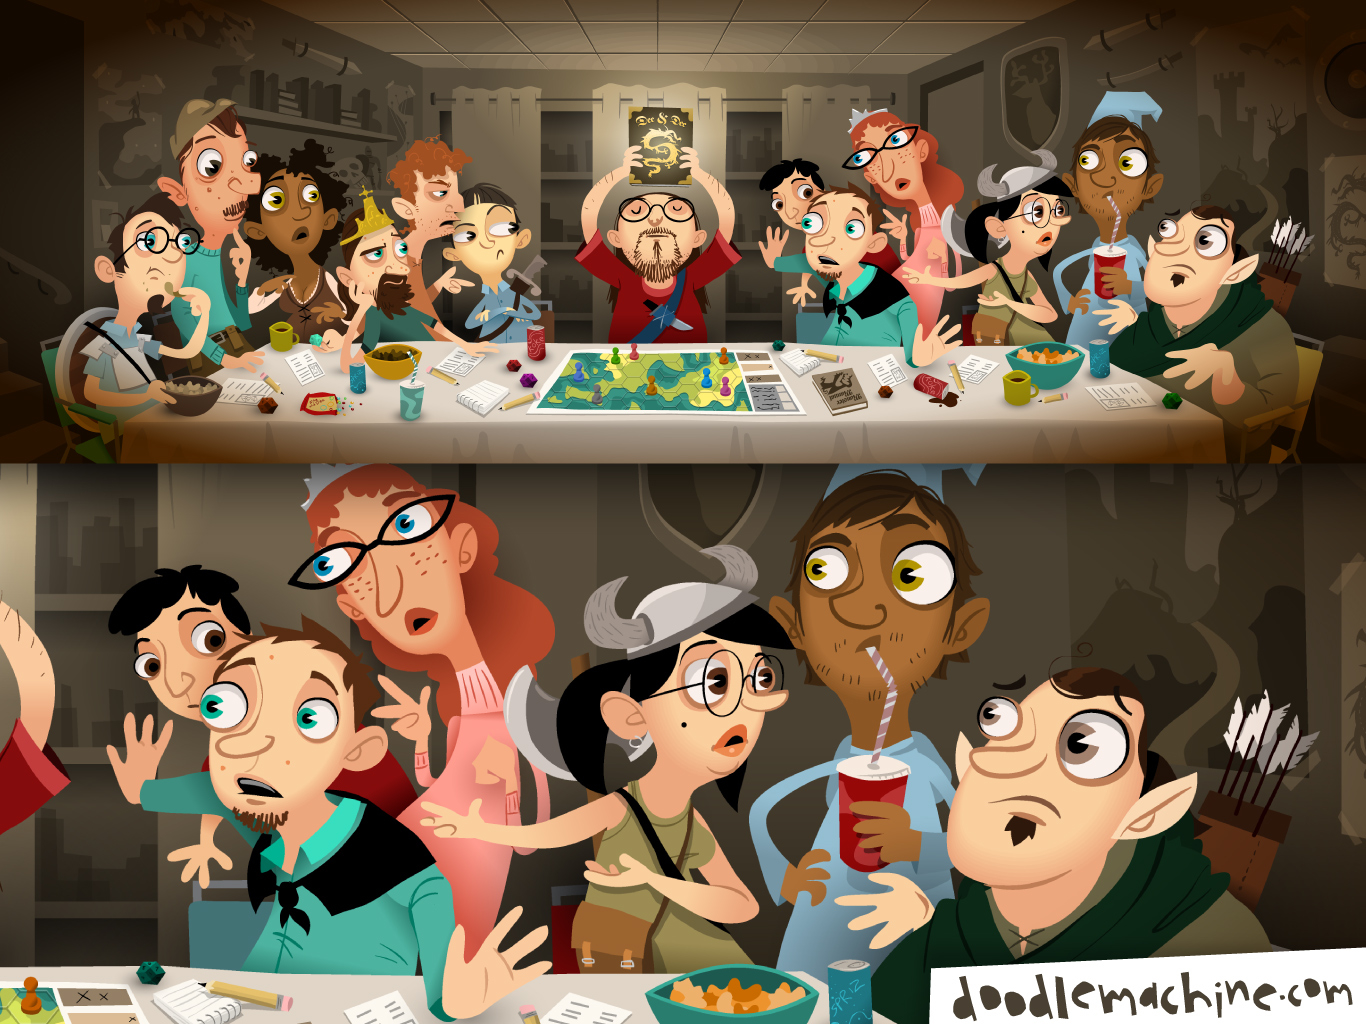 DnD Last Supper by Andre' The Doodlemachine on Dribbble